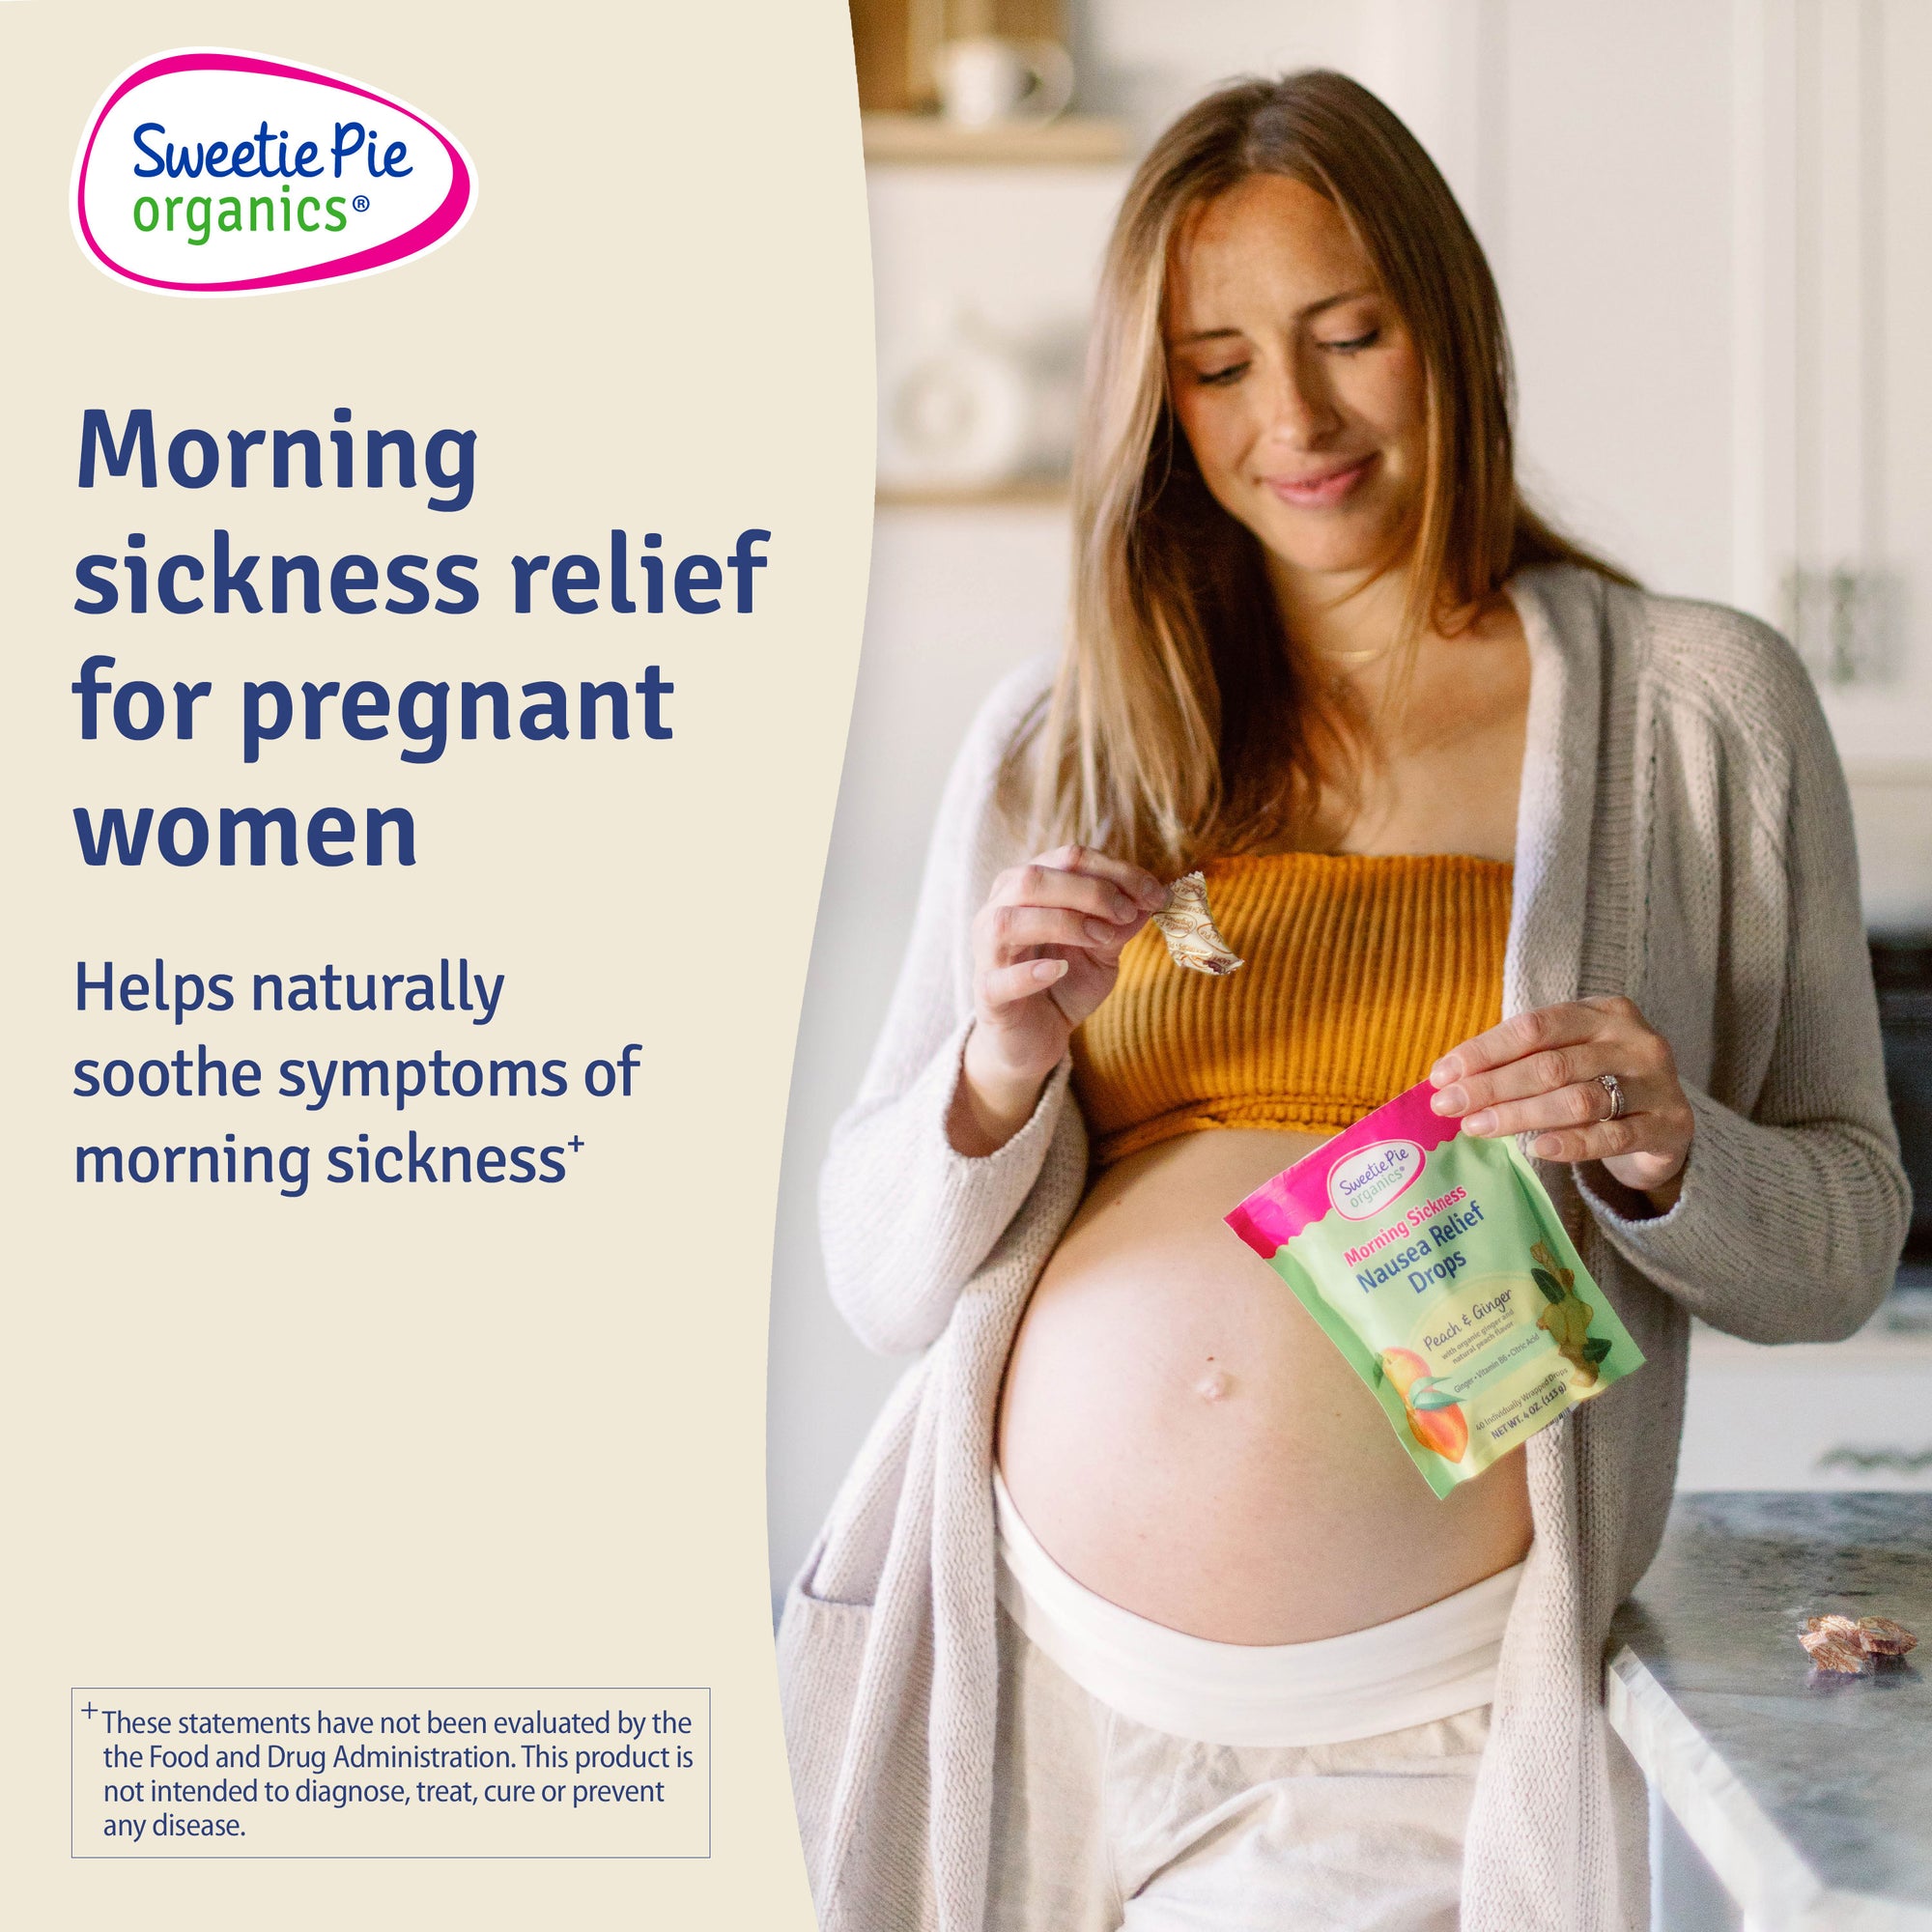 Pregnant mom-to-be holding bag of Sweetie Pie Morning Sickness Nausea Relief Drops